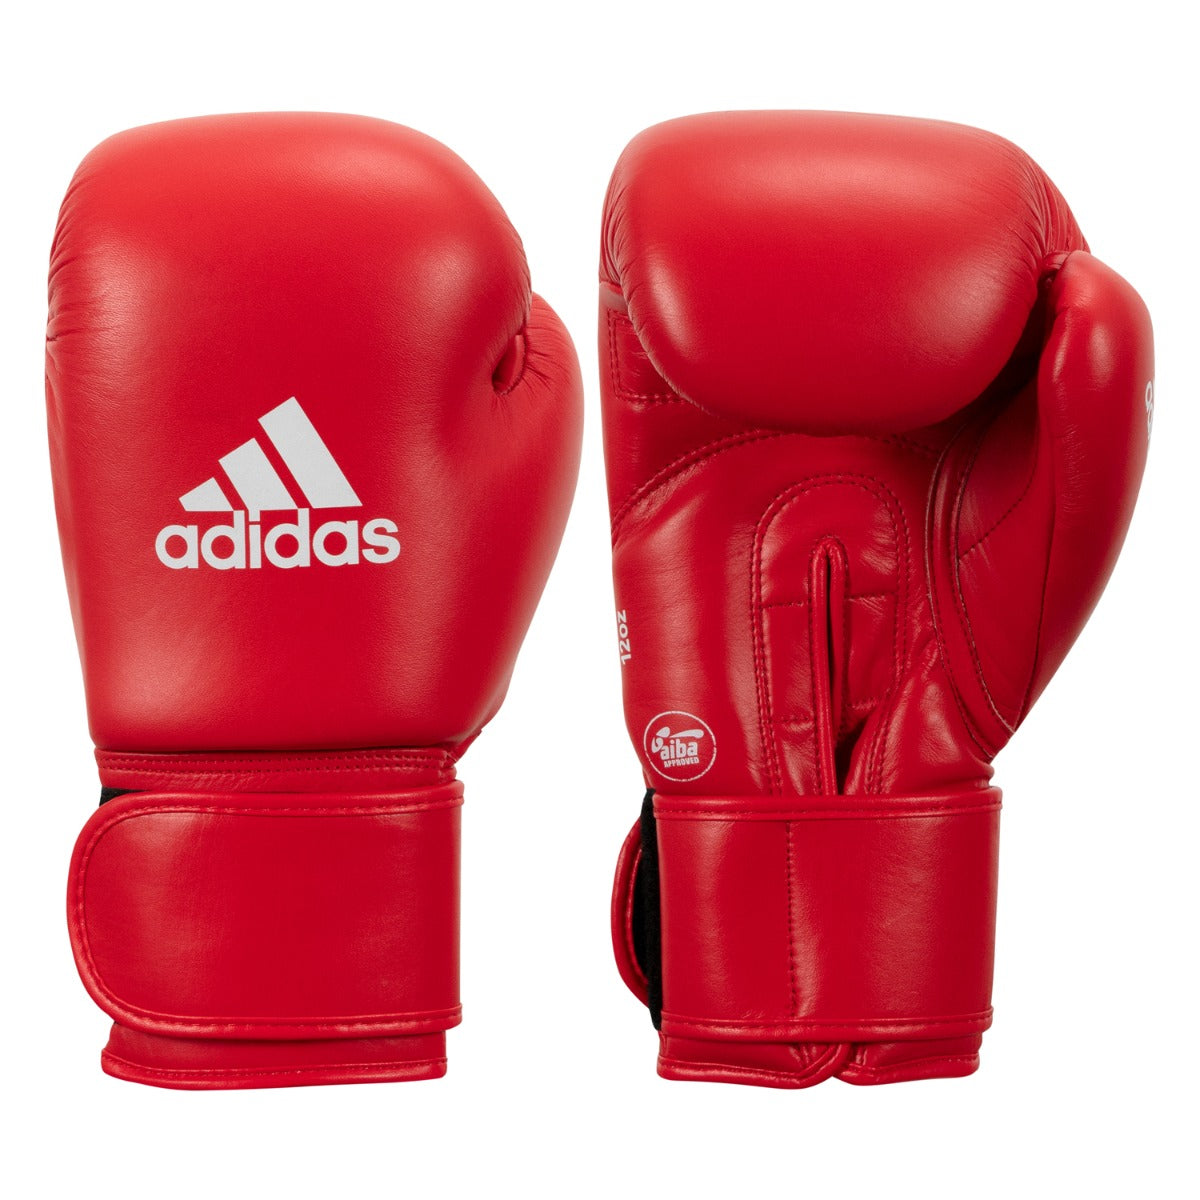 Adidas Amateur Competition Gloves